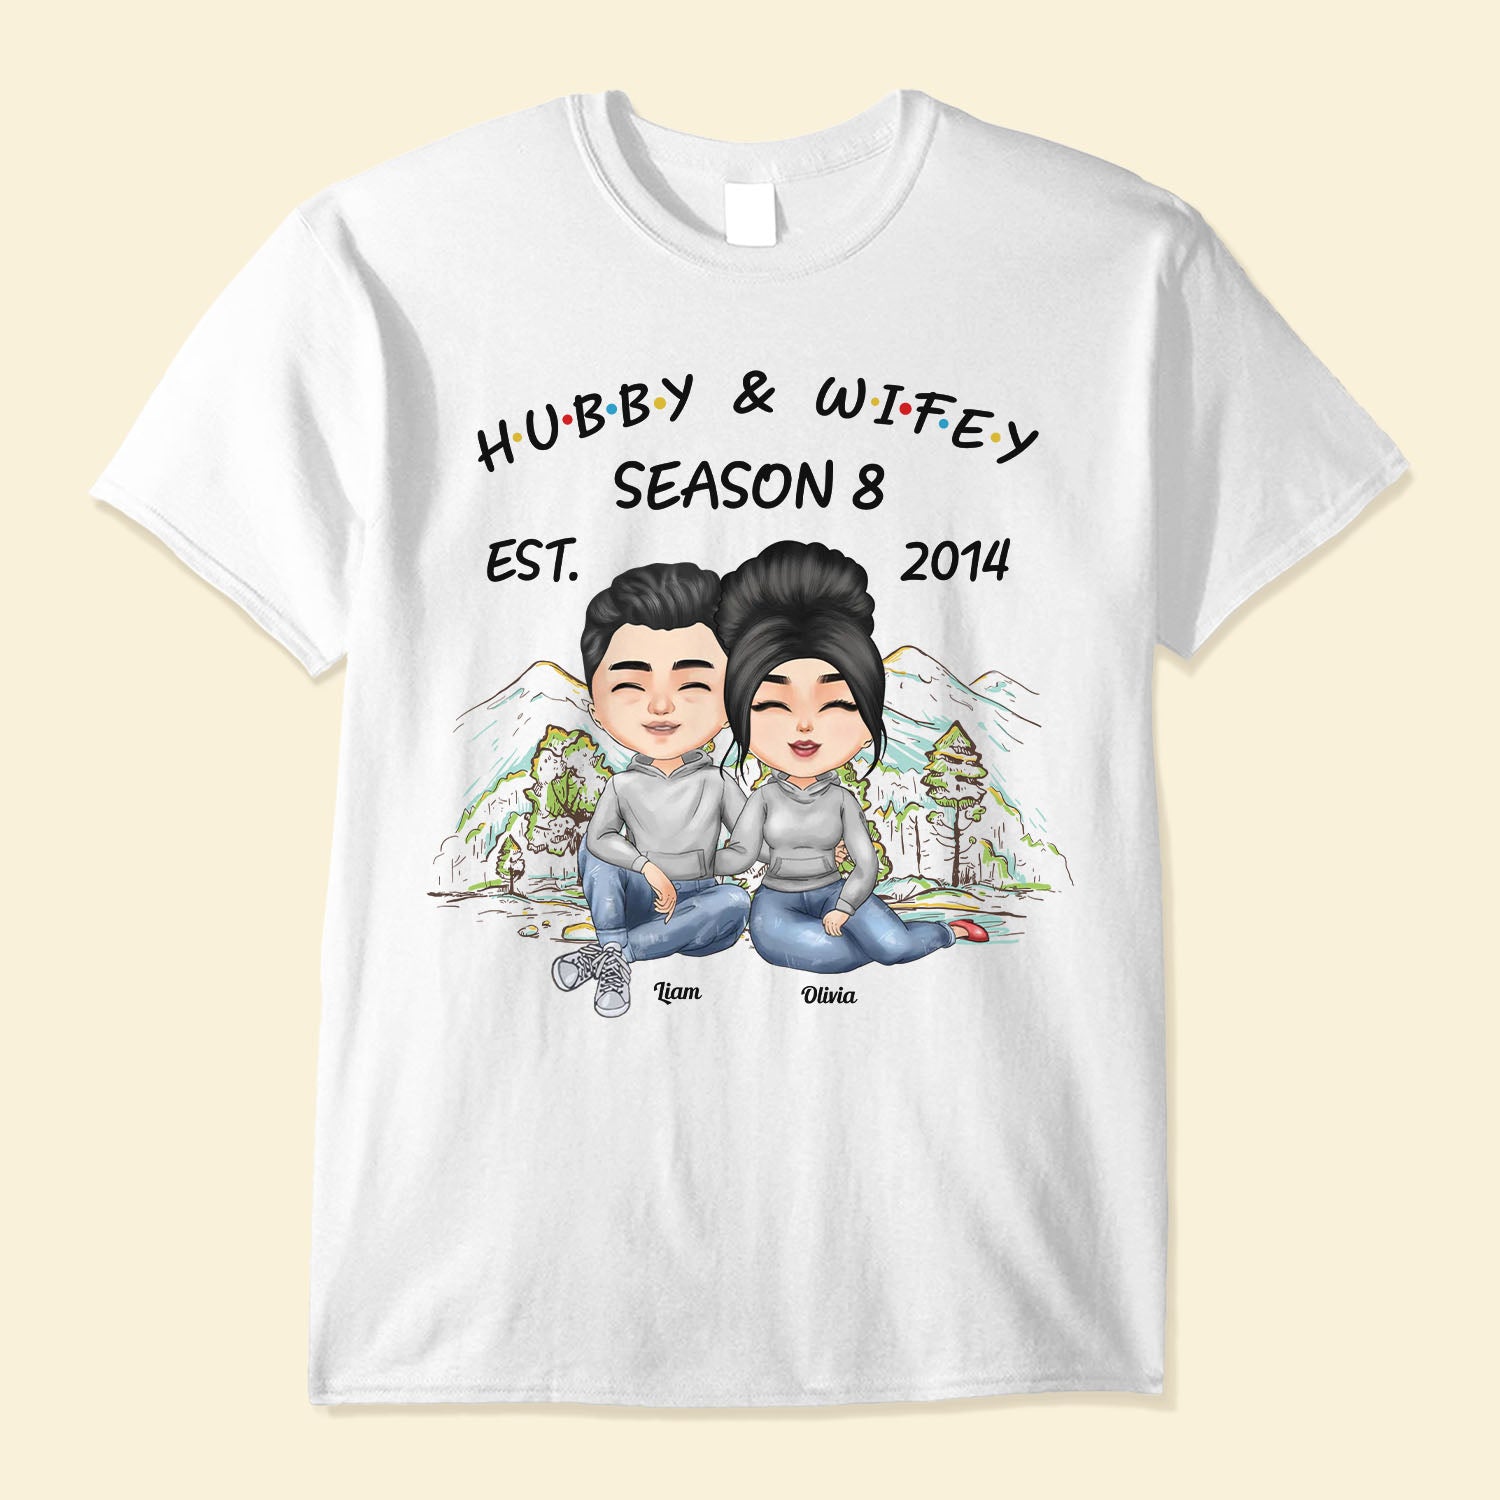 Hubby & Wifey Season - Personalized Shirt - Birthday Anniversary Gift For Husband, Wife, Gifts From Daughters, Sons To Parents